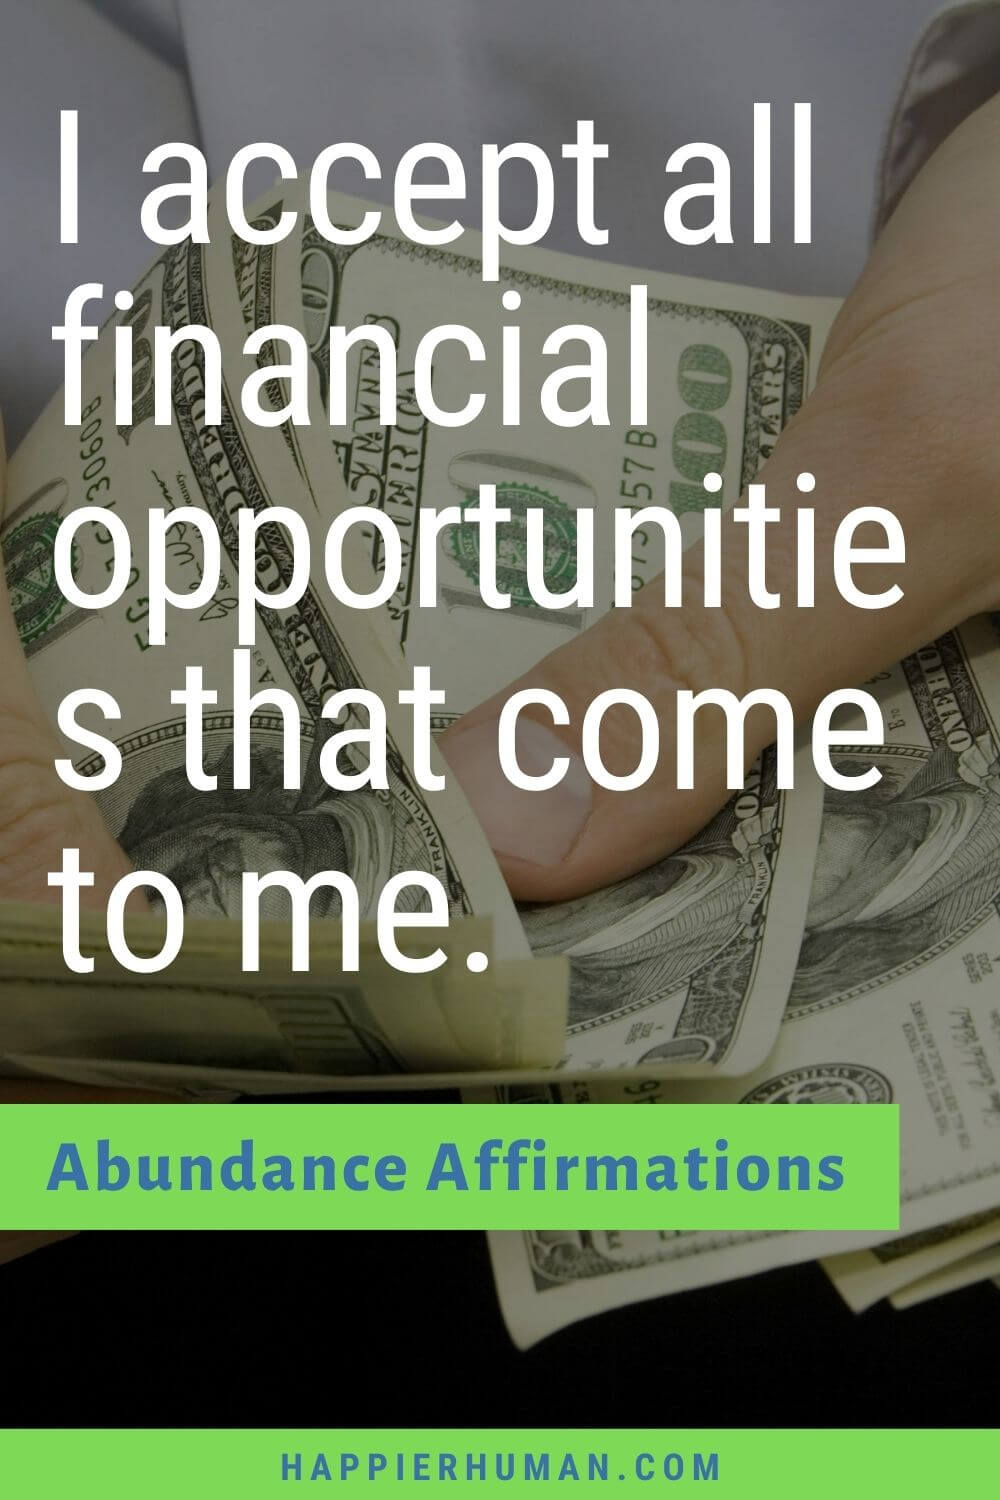 Abundance Affirmations - I accept all financial opportunities that come to me. | 10 money affirmations that really work | 7 most powerful money affirmations | morning affirmations for abundance